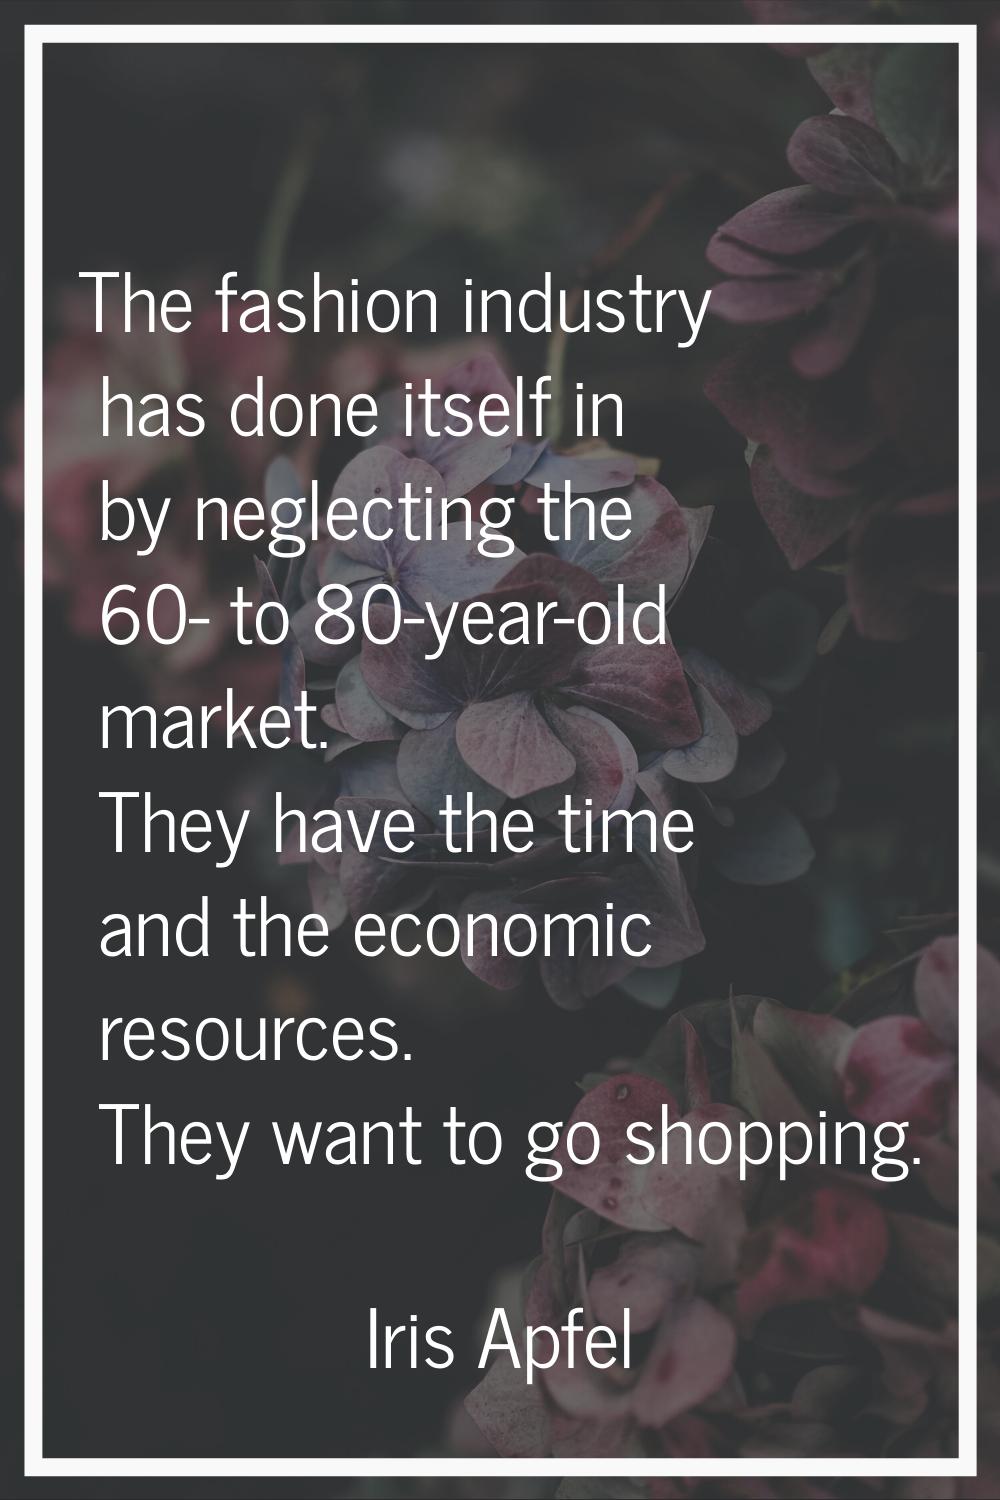 The fashion industry has done itself in by neglecting the 60- to 80-year-old market. They have the 